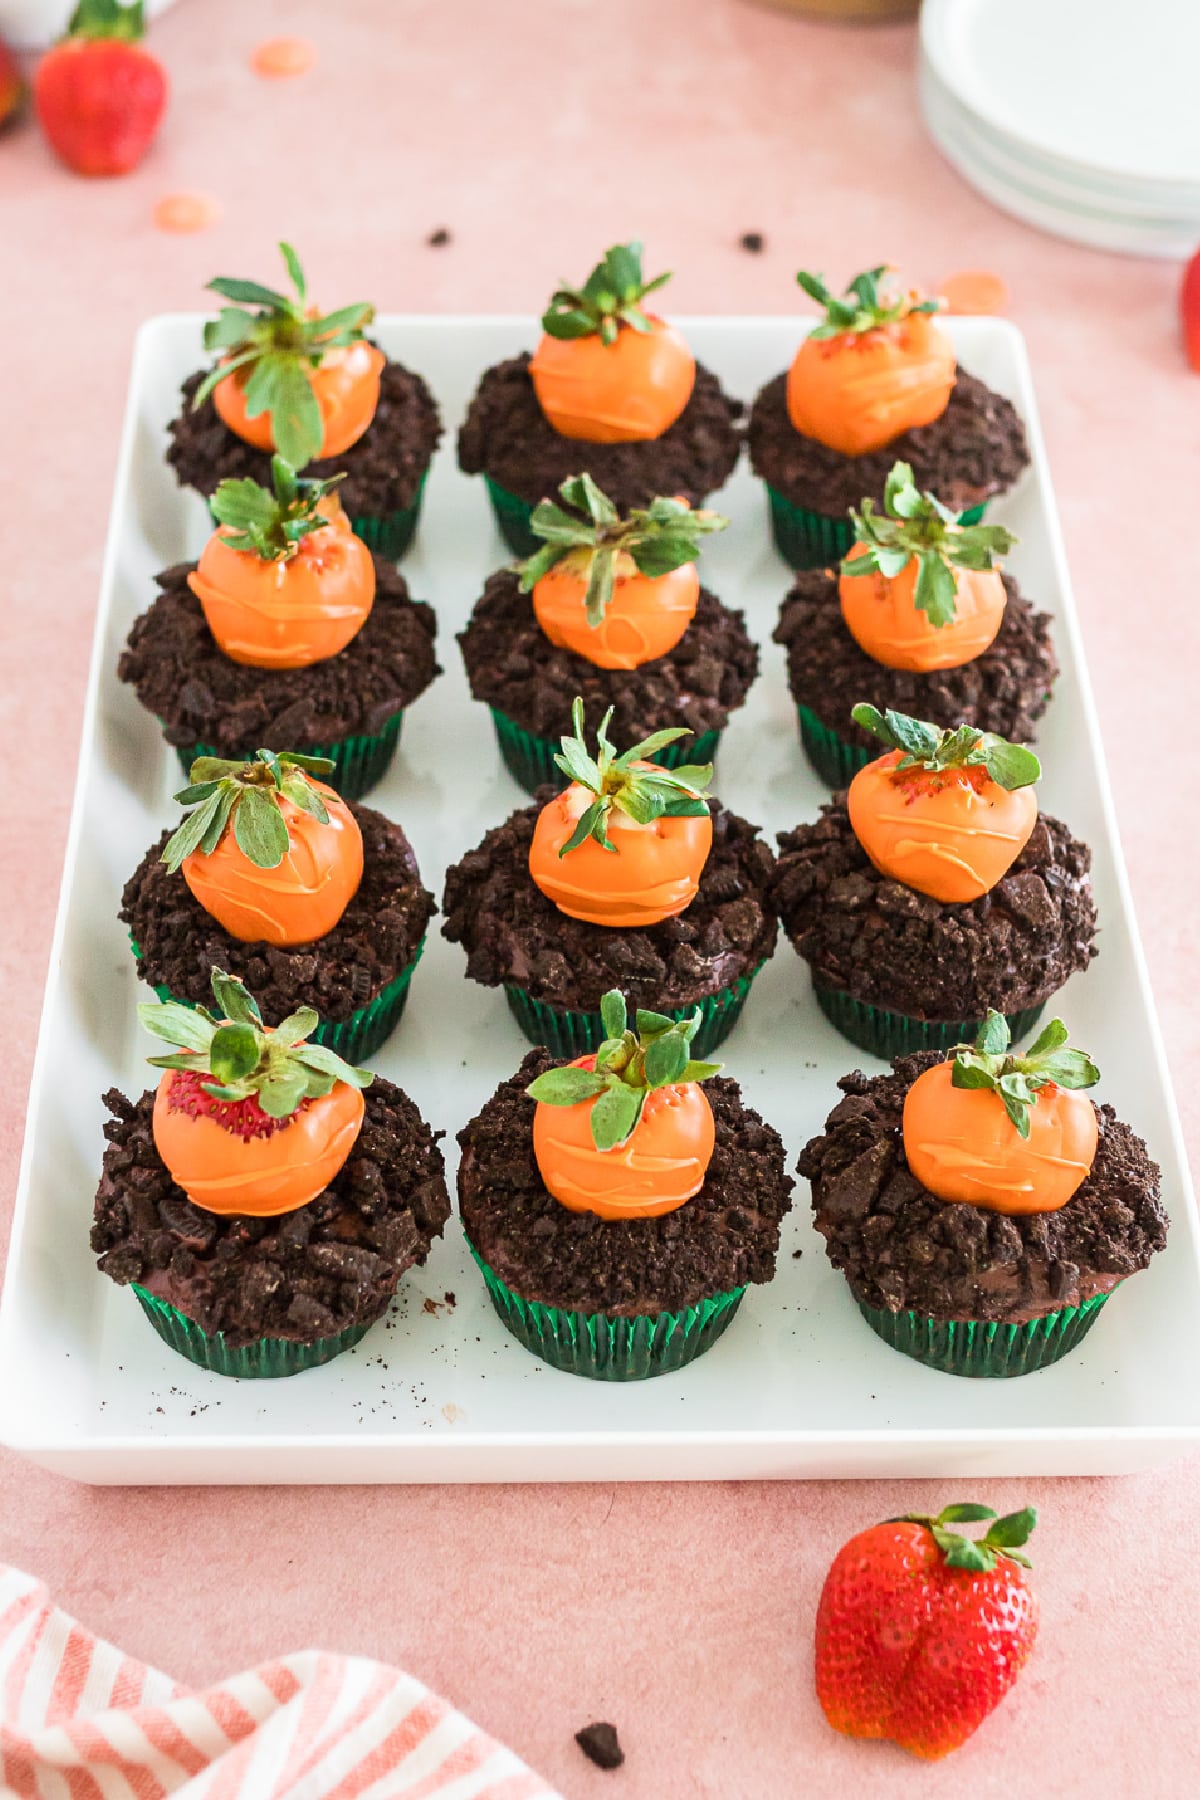 Platter full of decorated chocolate carrot patch cupcakes lined up in rows from the side.